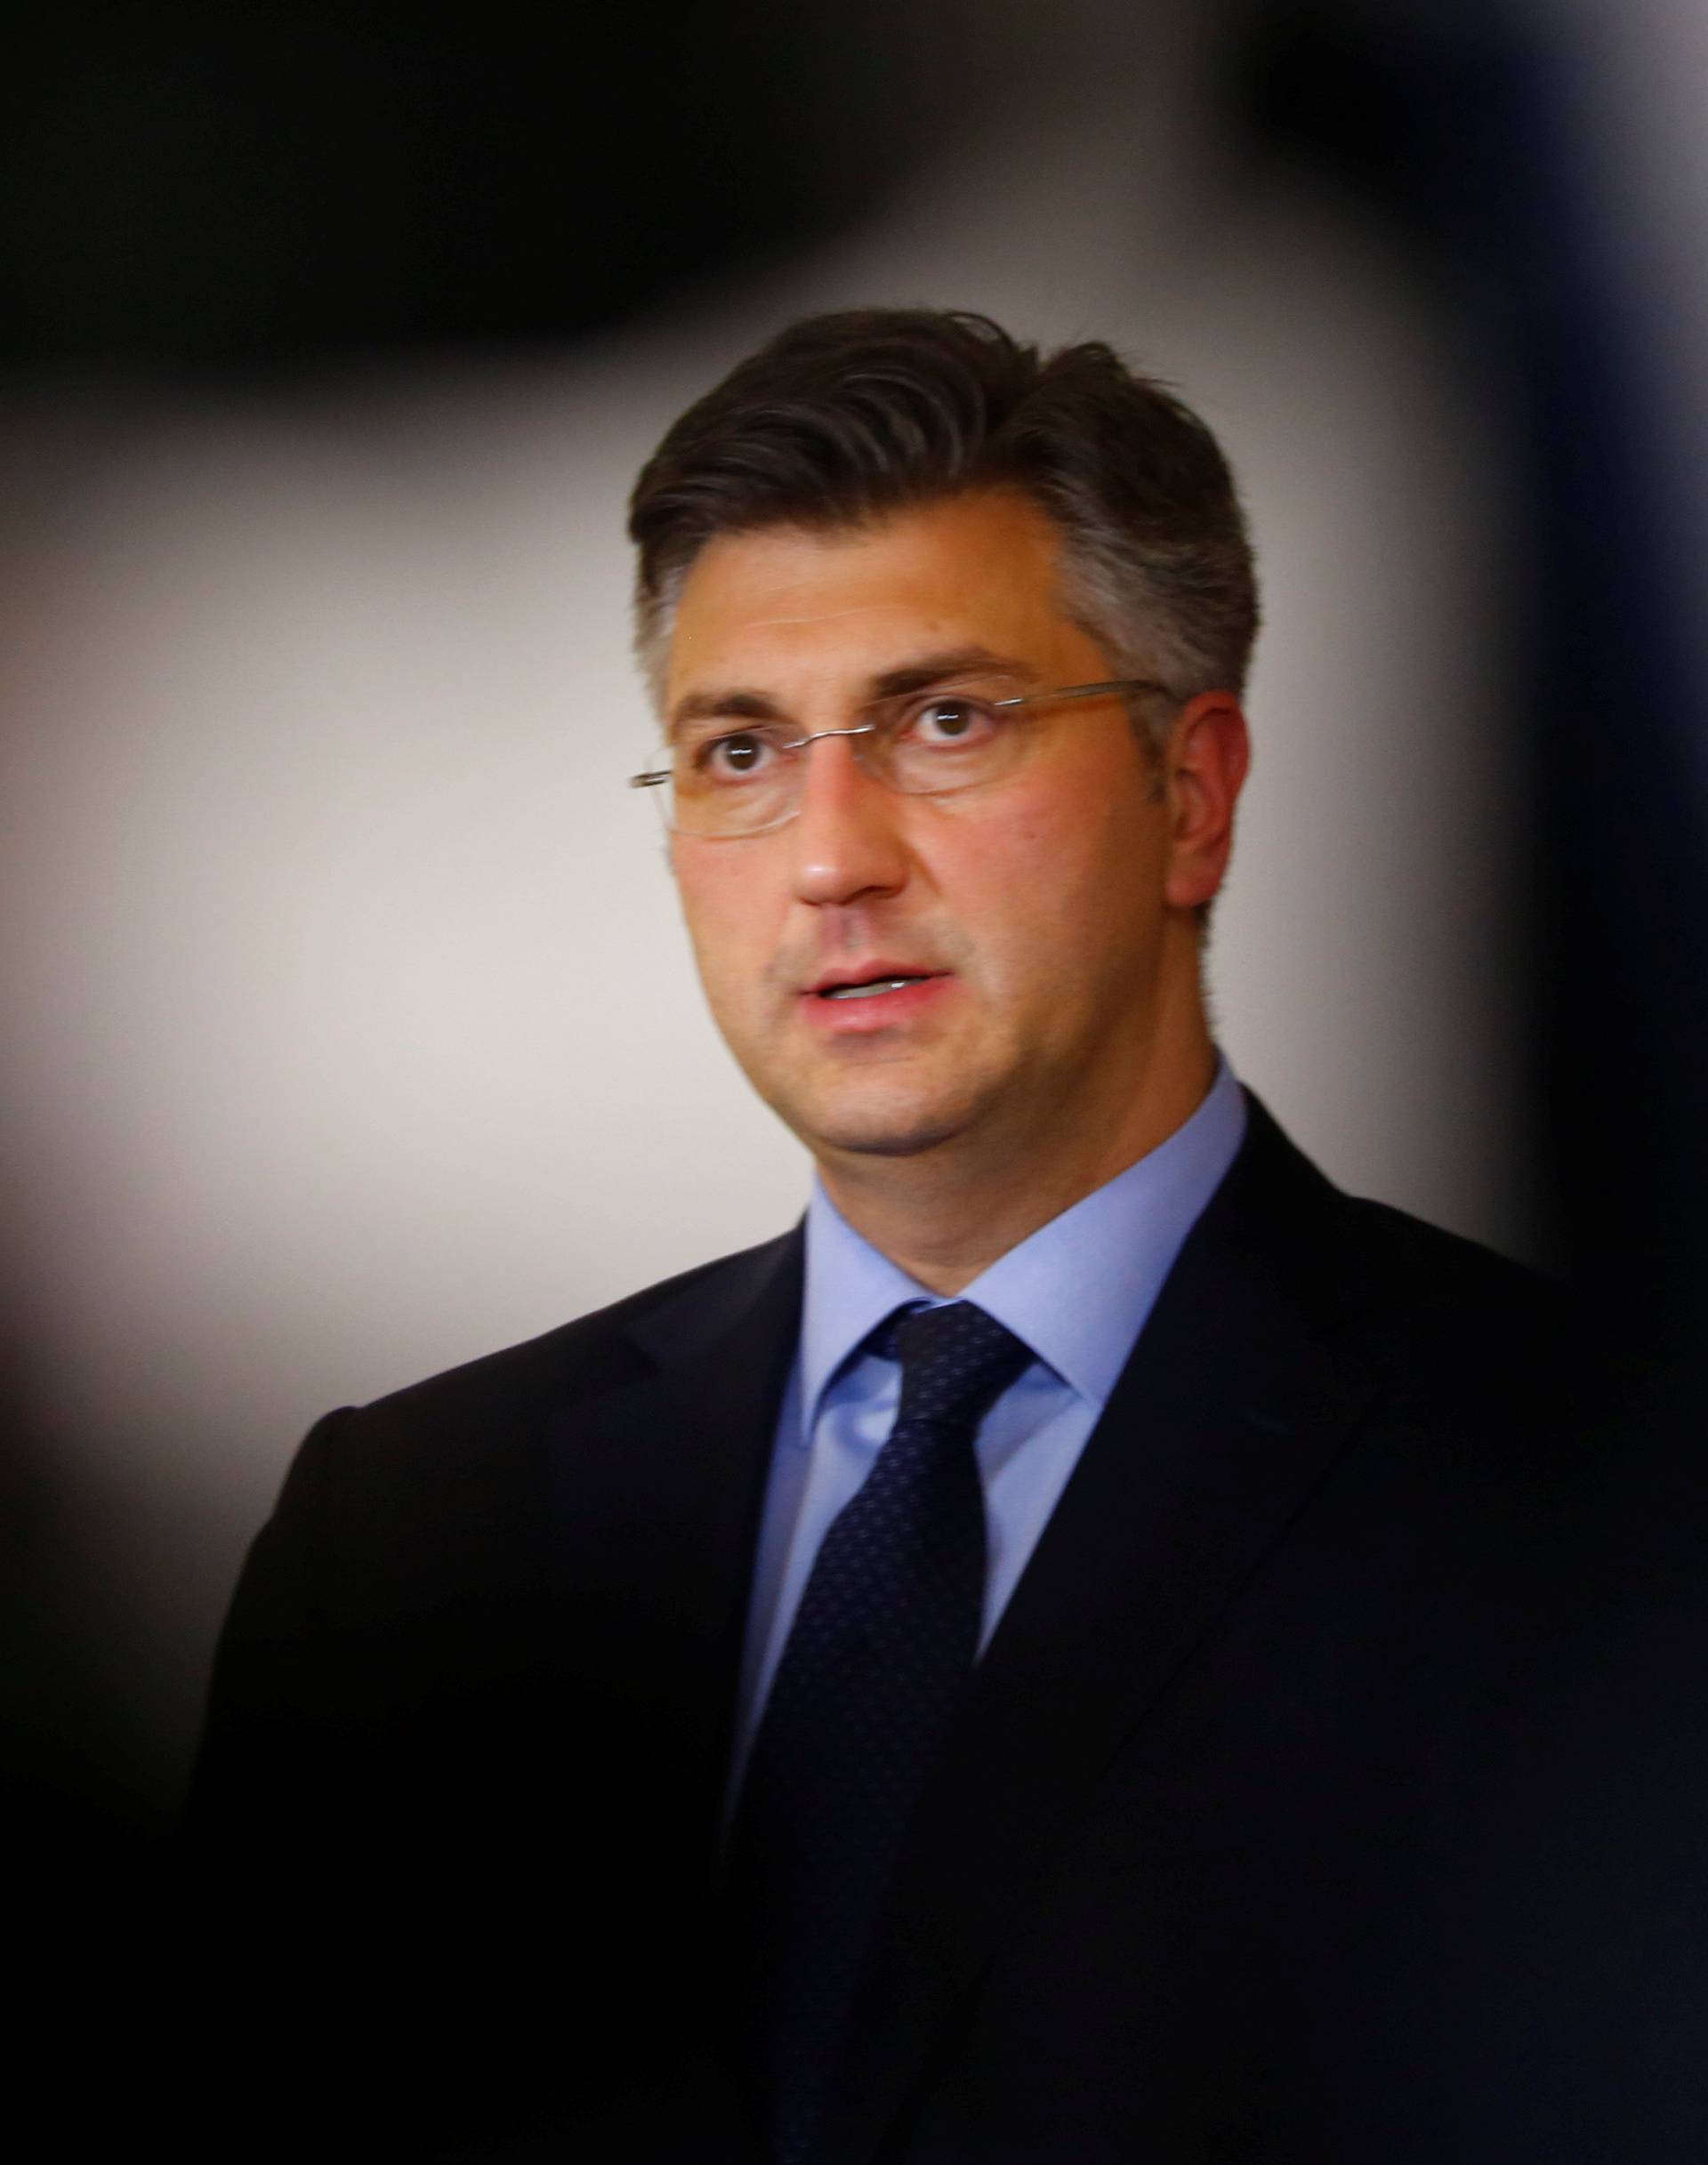 Croatian Prime Minister Plenkovic addresses a news conference in Vienna